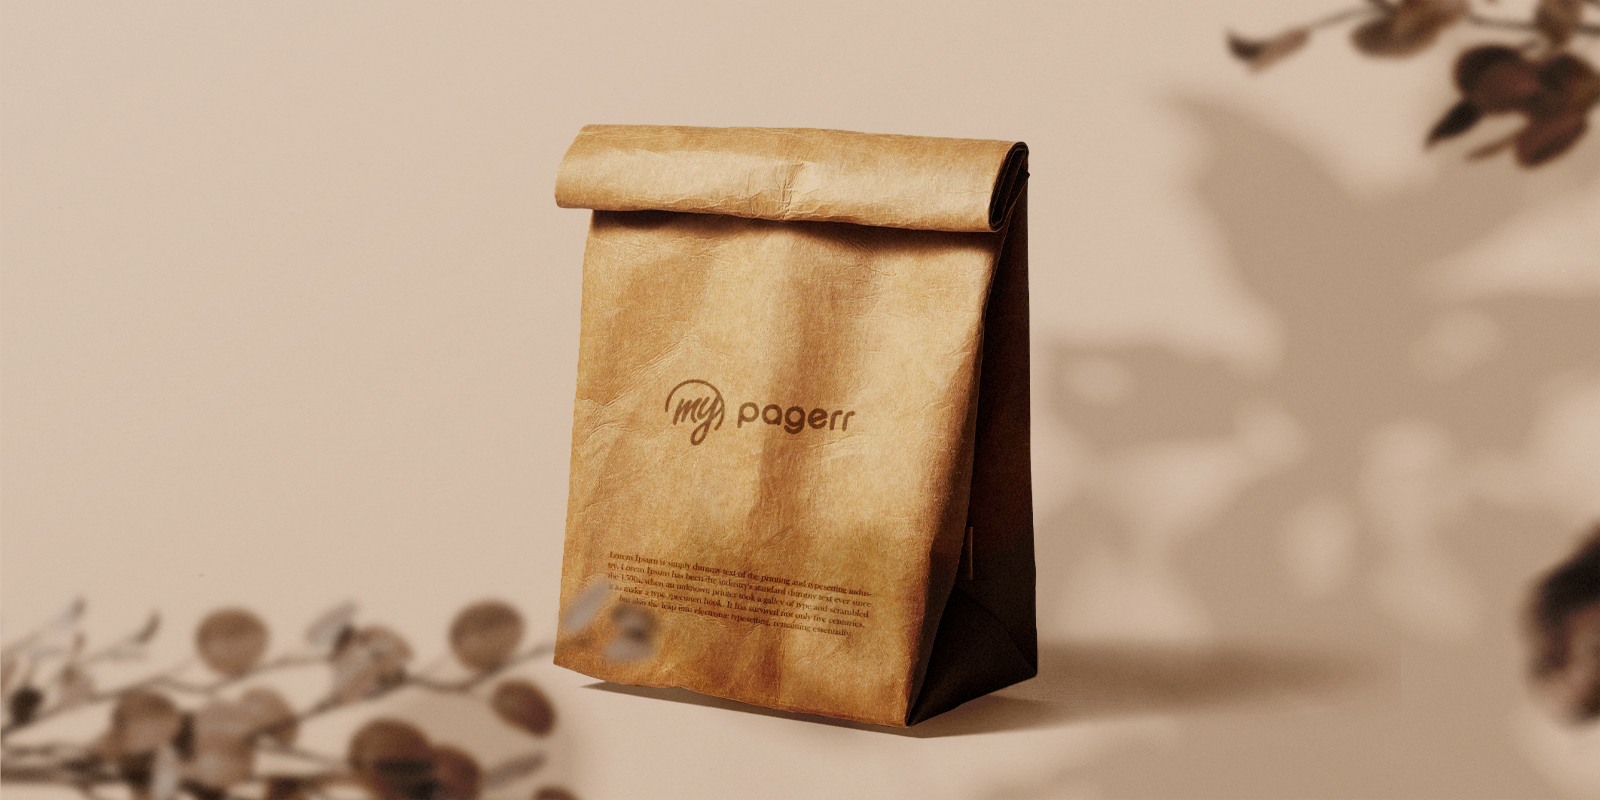 Kraft paper bags in Adelaide - Print with Pagerr